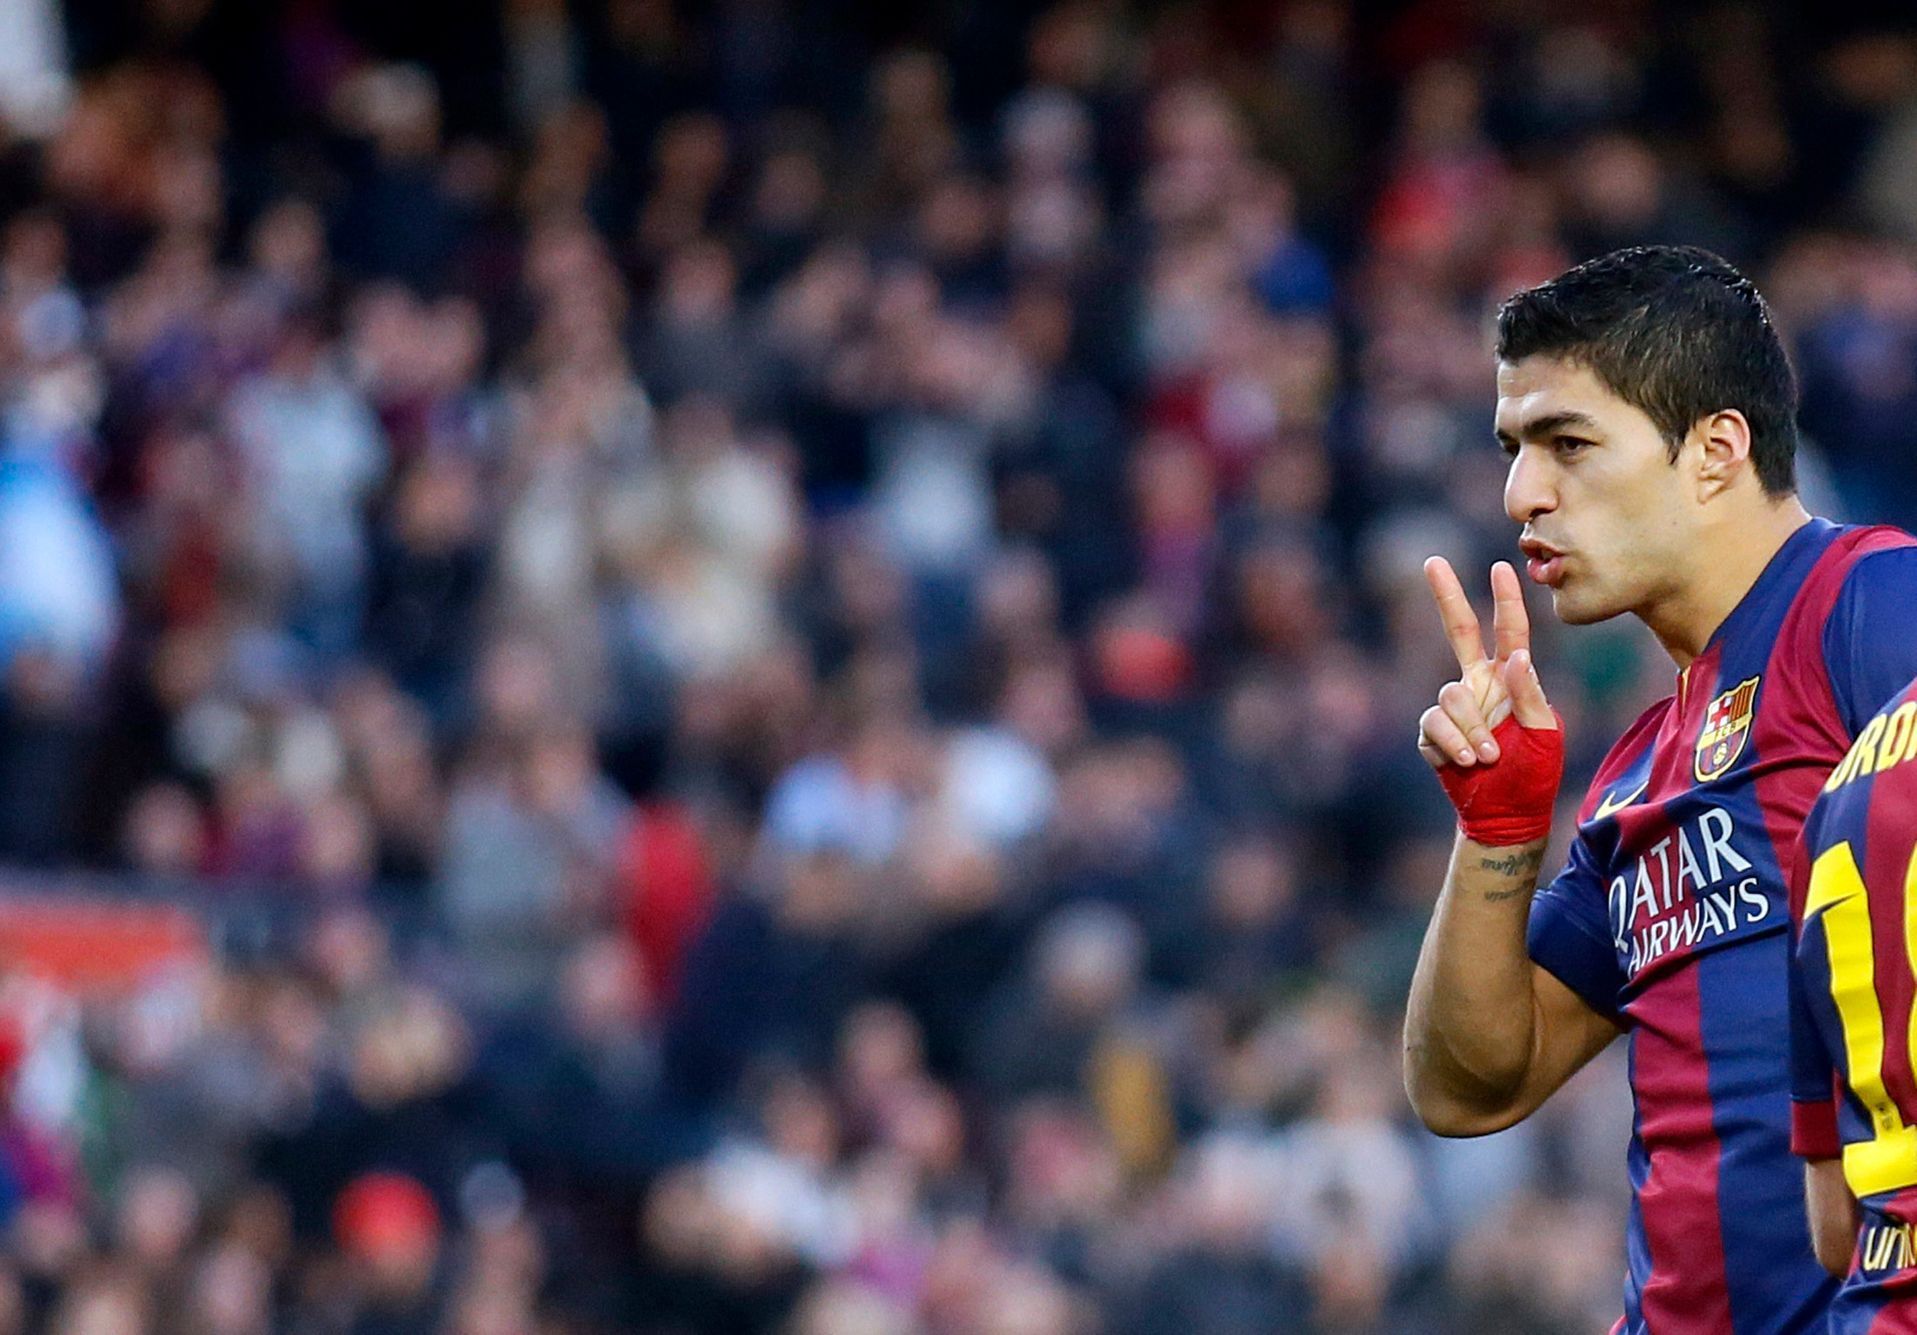 Barcelona's player Luis Suarez celebrates a goal against Cordoba during their Spanish First division soccer match in Barcelona